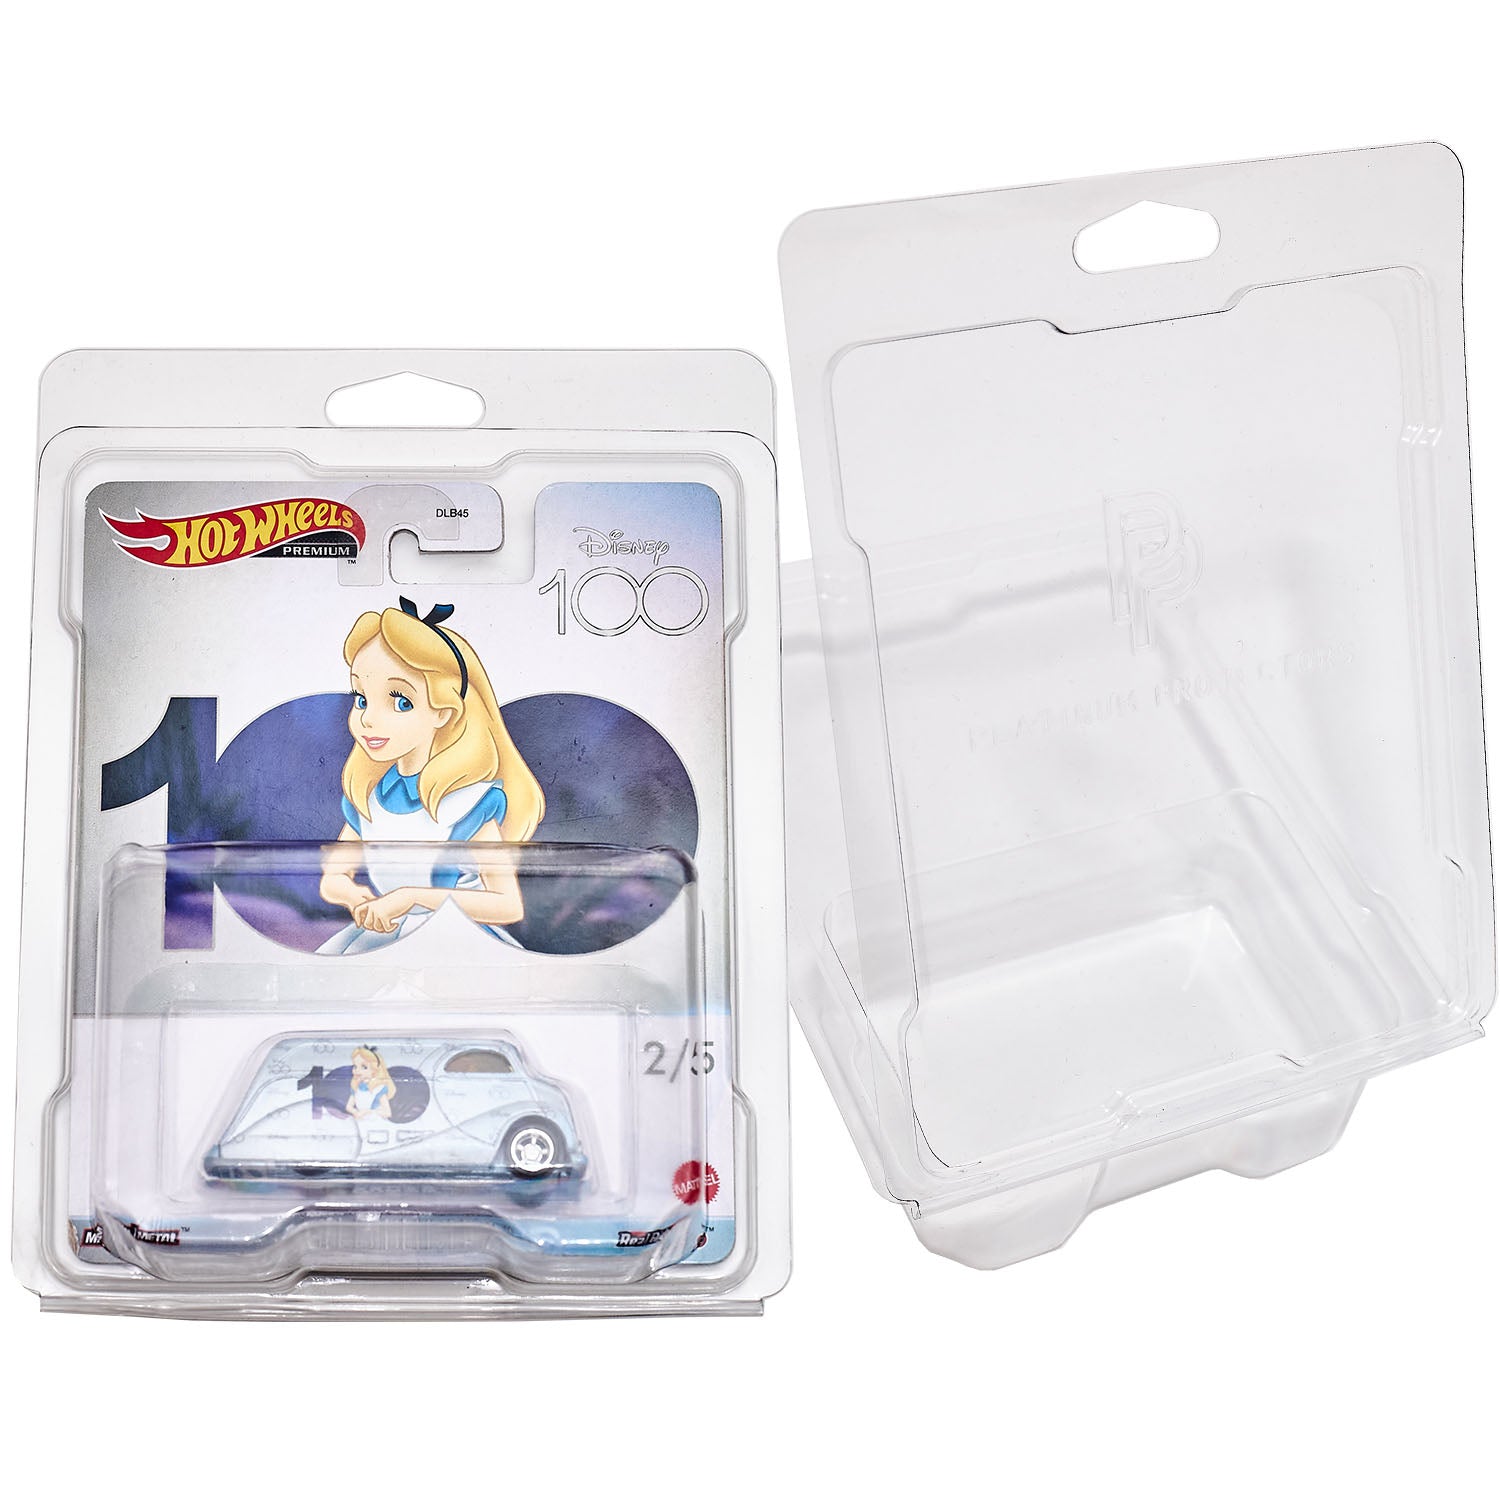 Platinum Protectors for Hot Wheels Premium Line & Car Culture (with retail packaging)